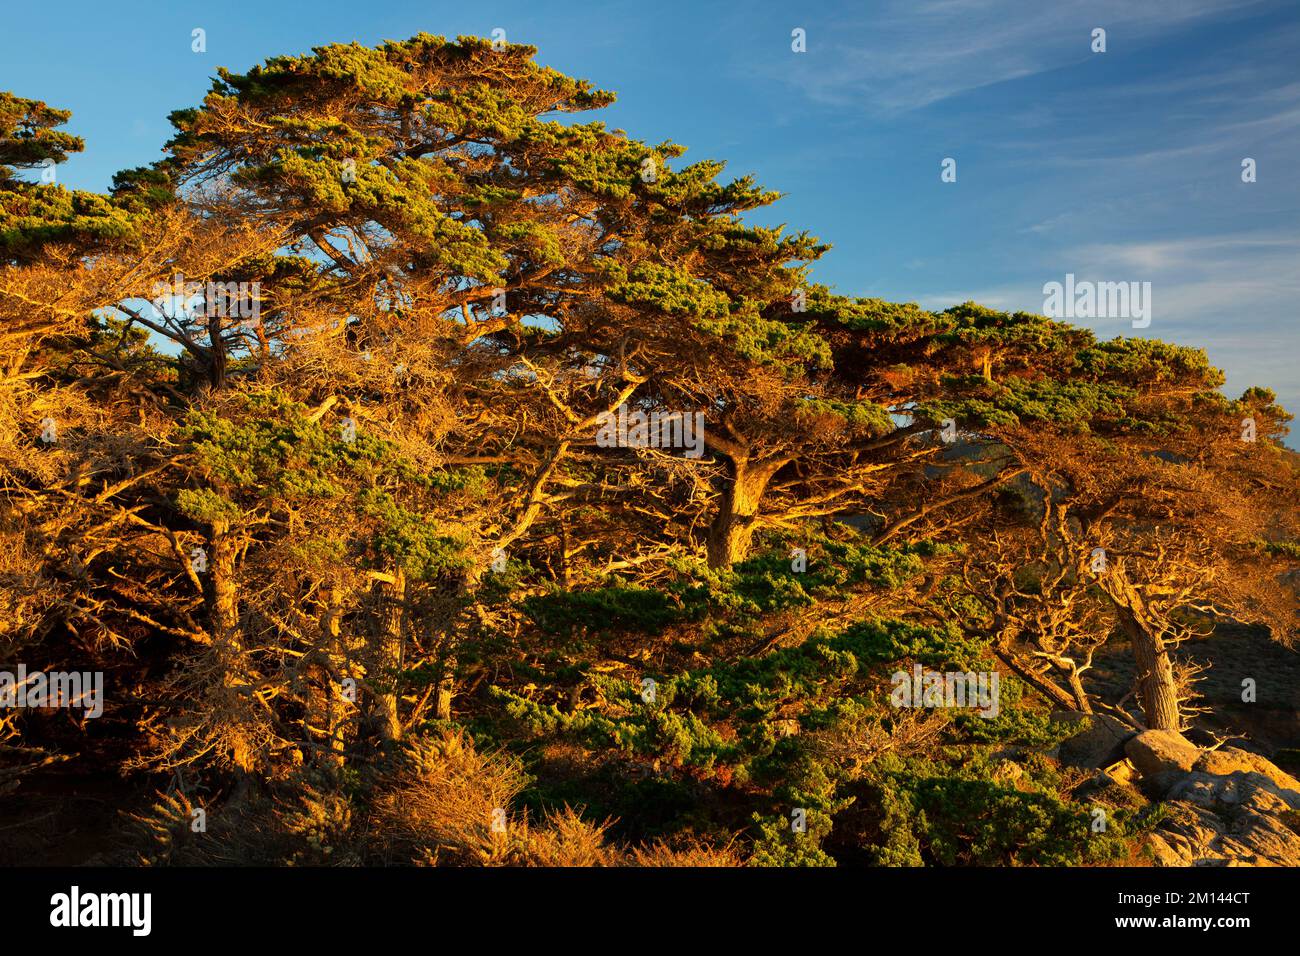 Monterey cypress, Point Lobos State Reserve, Big Sur Coast Highway Scenic Byway, California Stock Photo